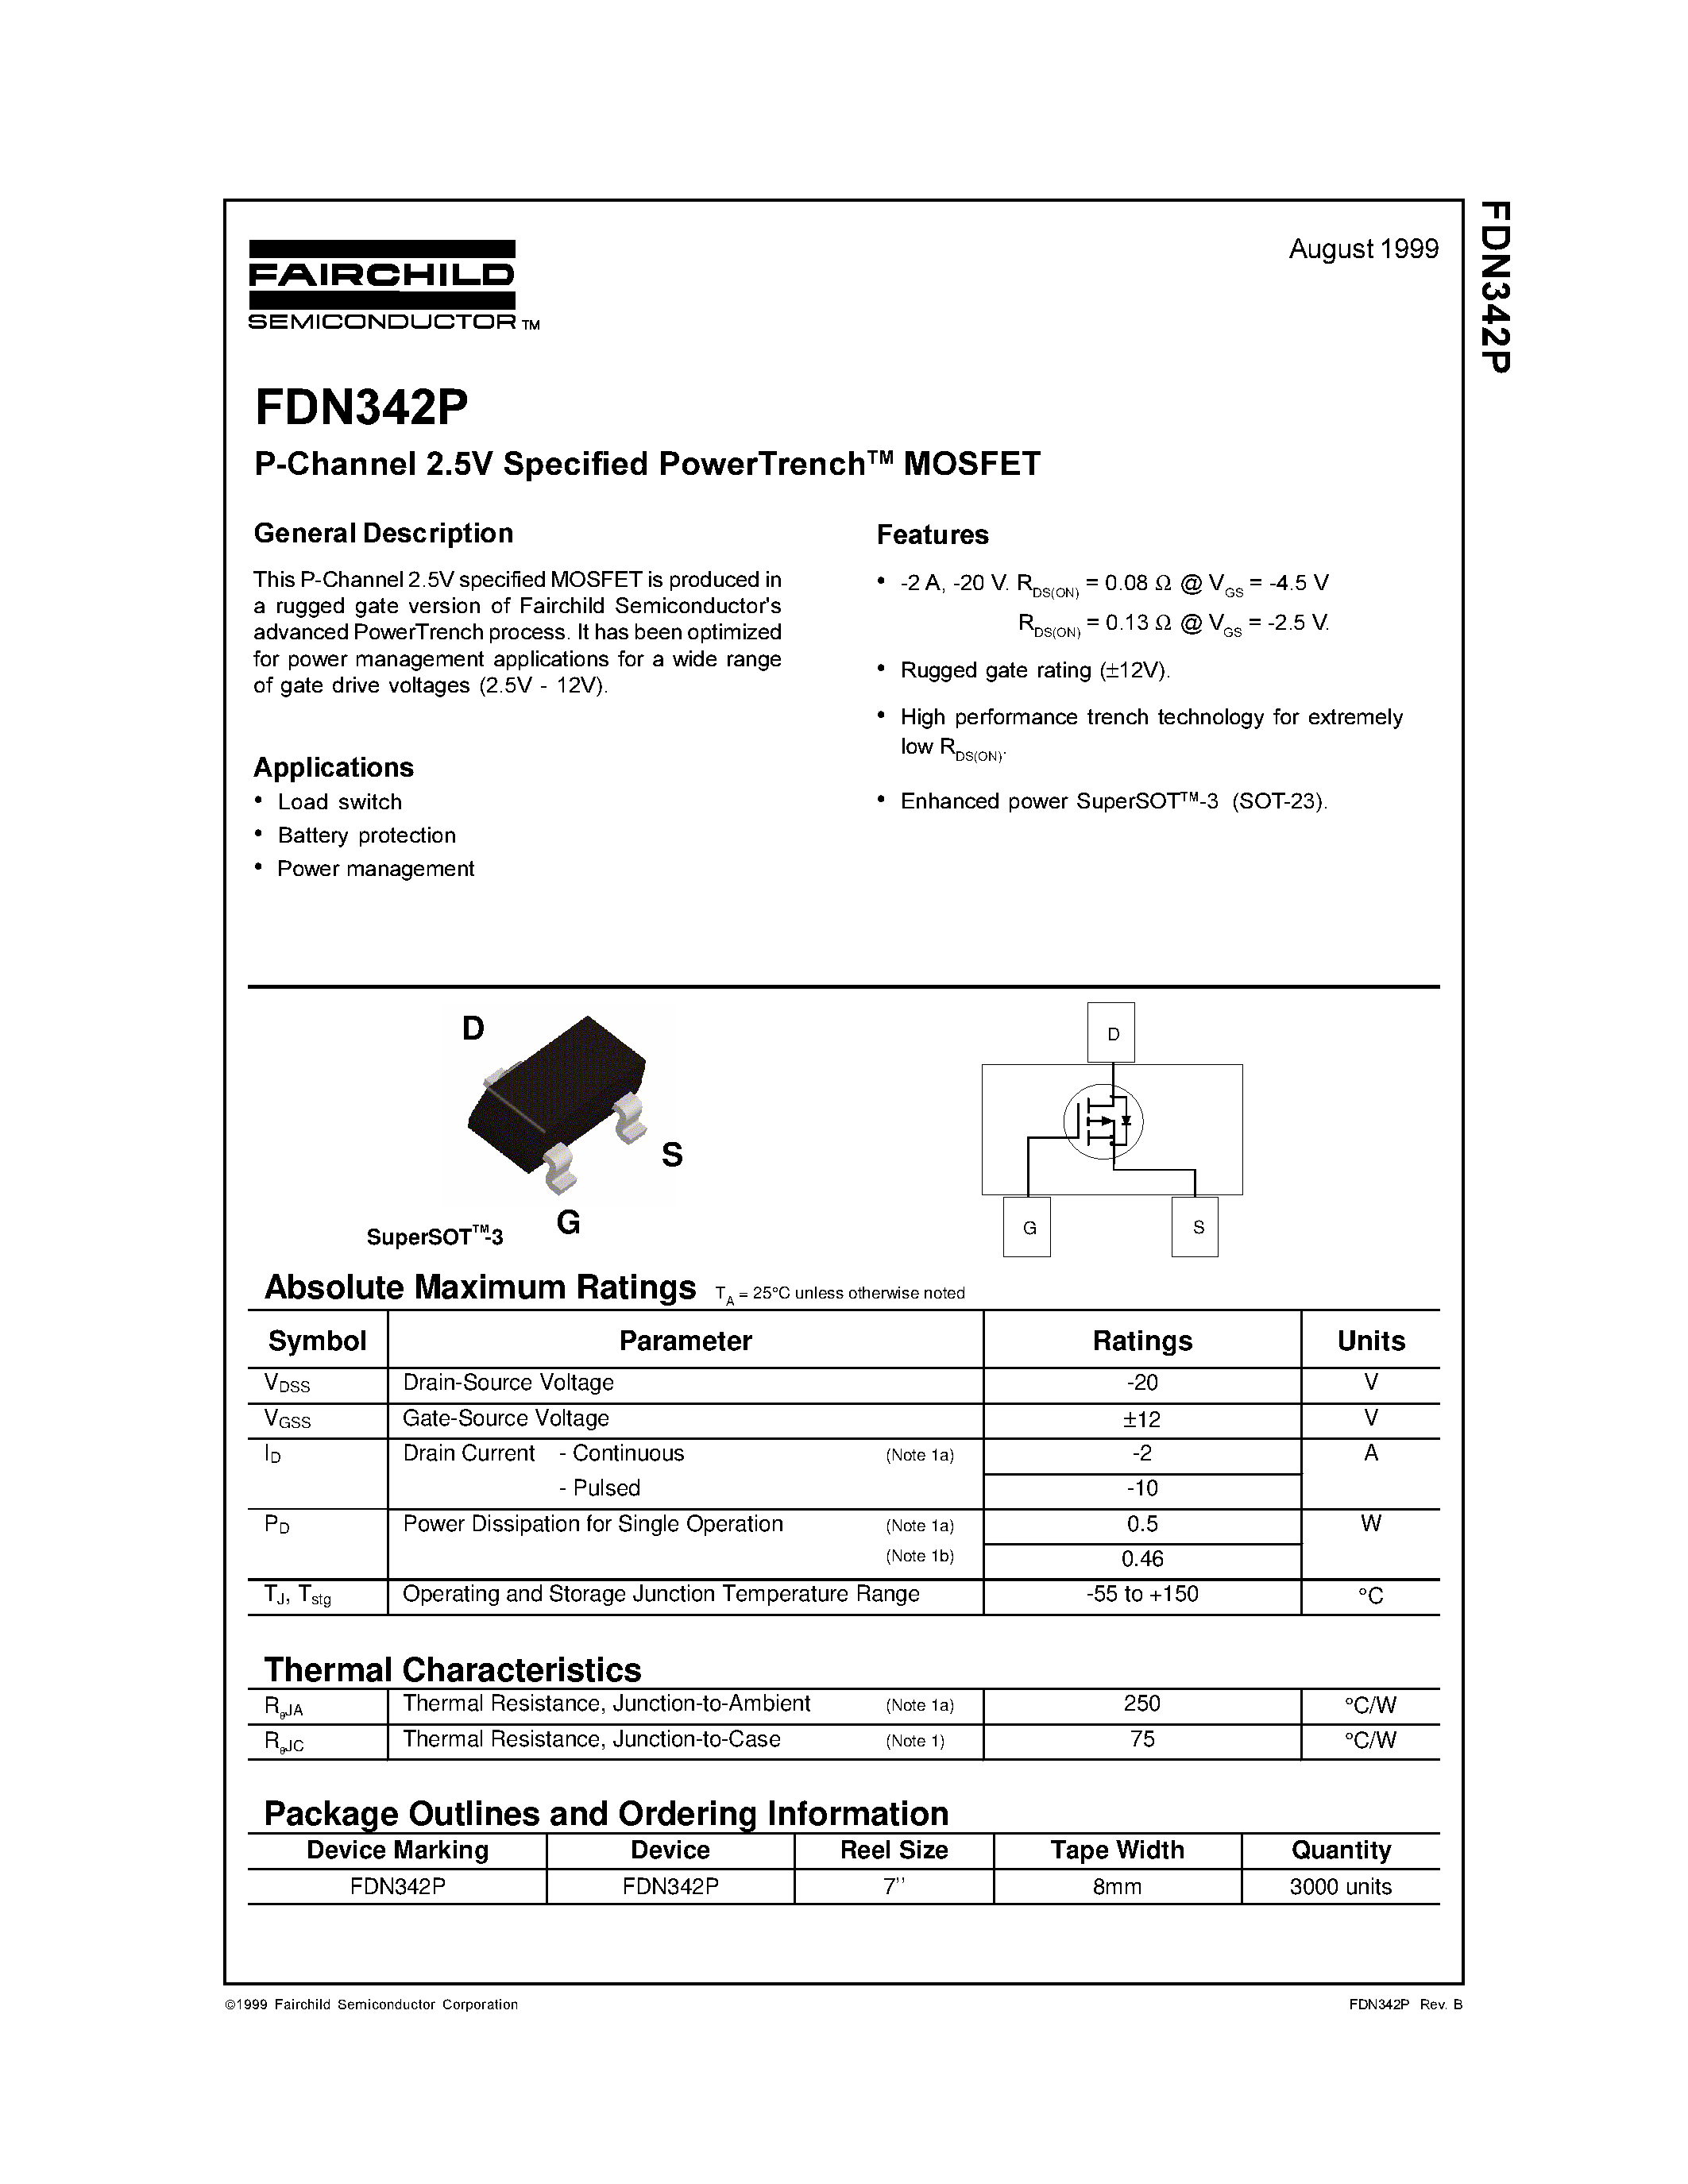 Datasheet FDN342P - P-Channel 2.5V Specified PowerTrench MOSFET page 1